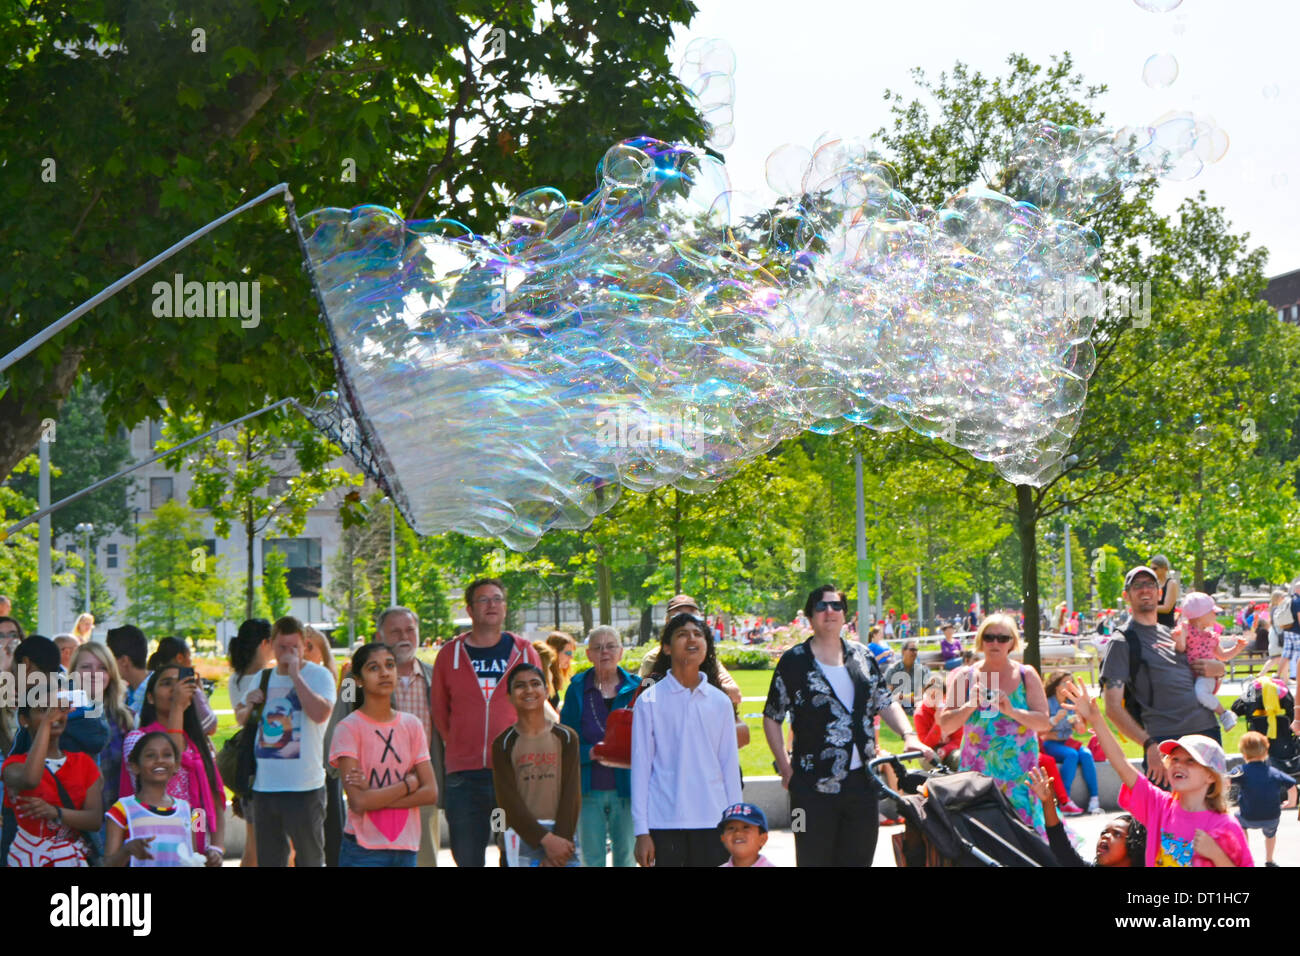 Families enjoying a demonstration of big bubble creations using a large net and cord wand on two poles Stock Photo